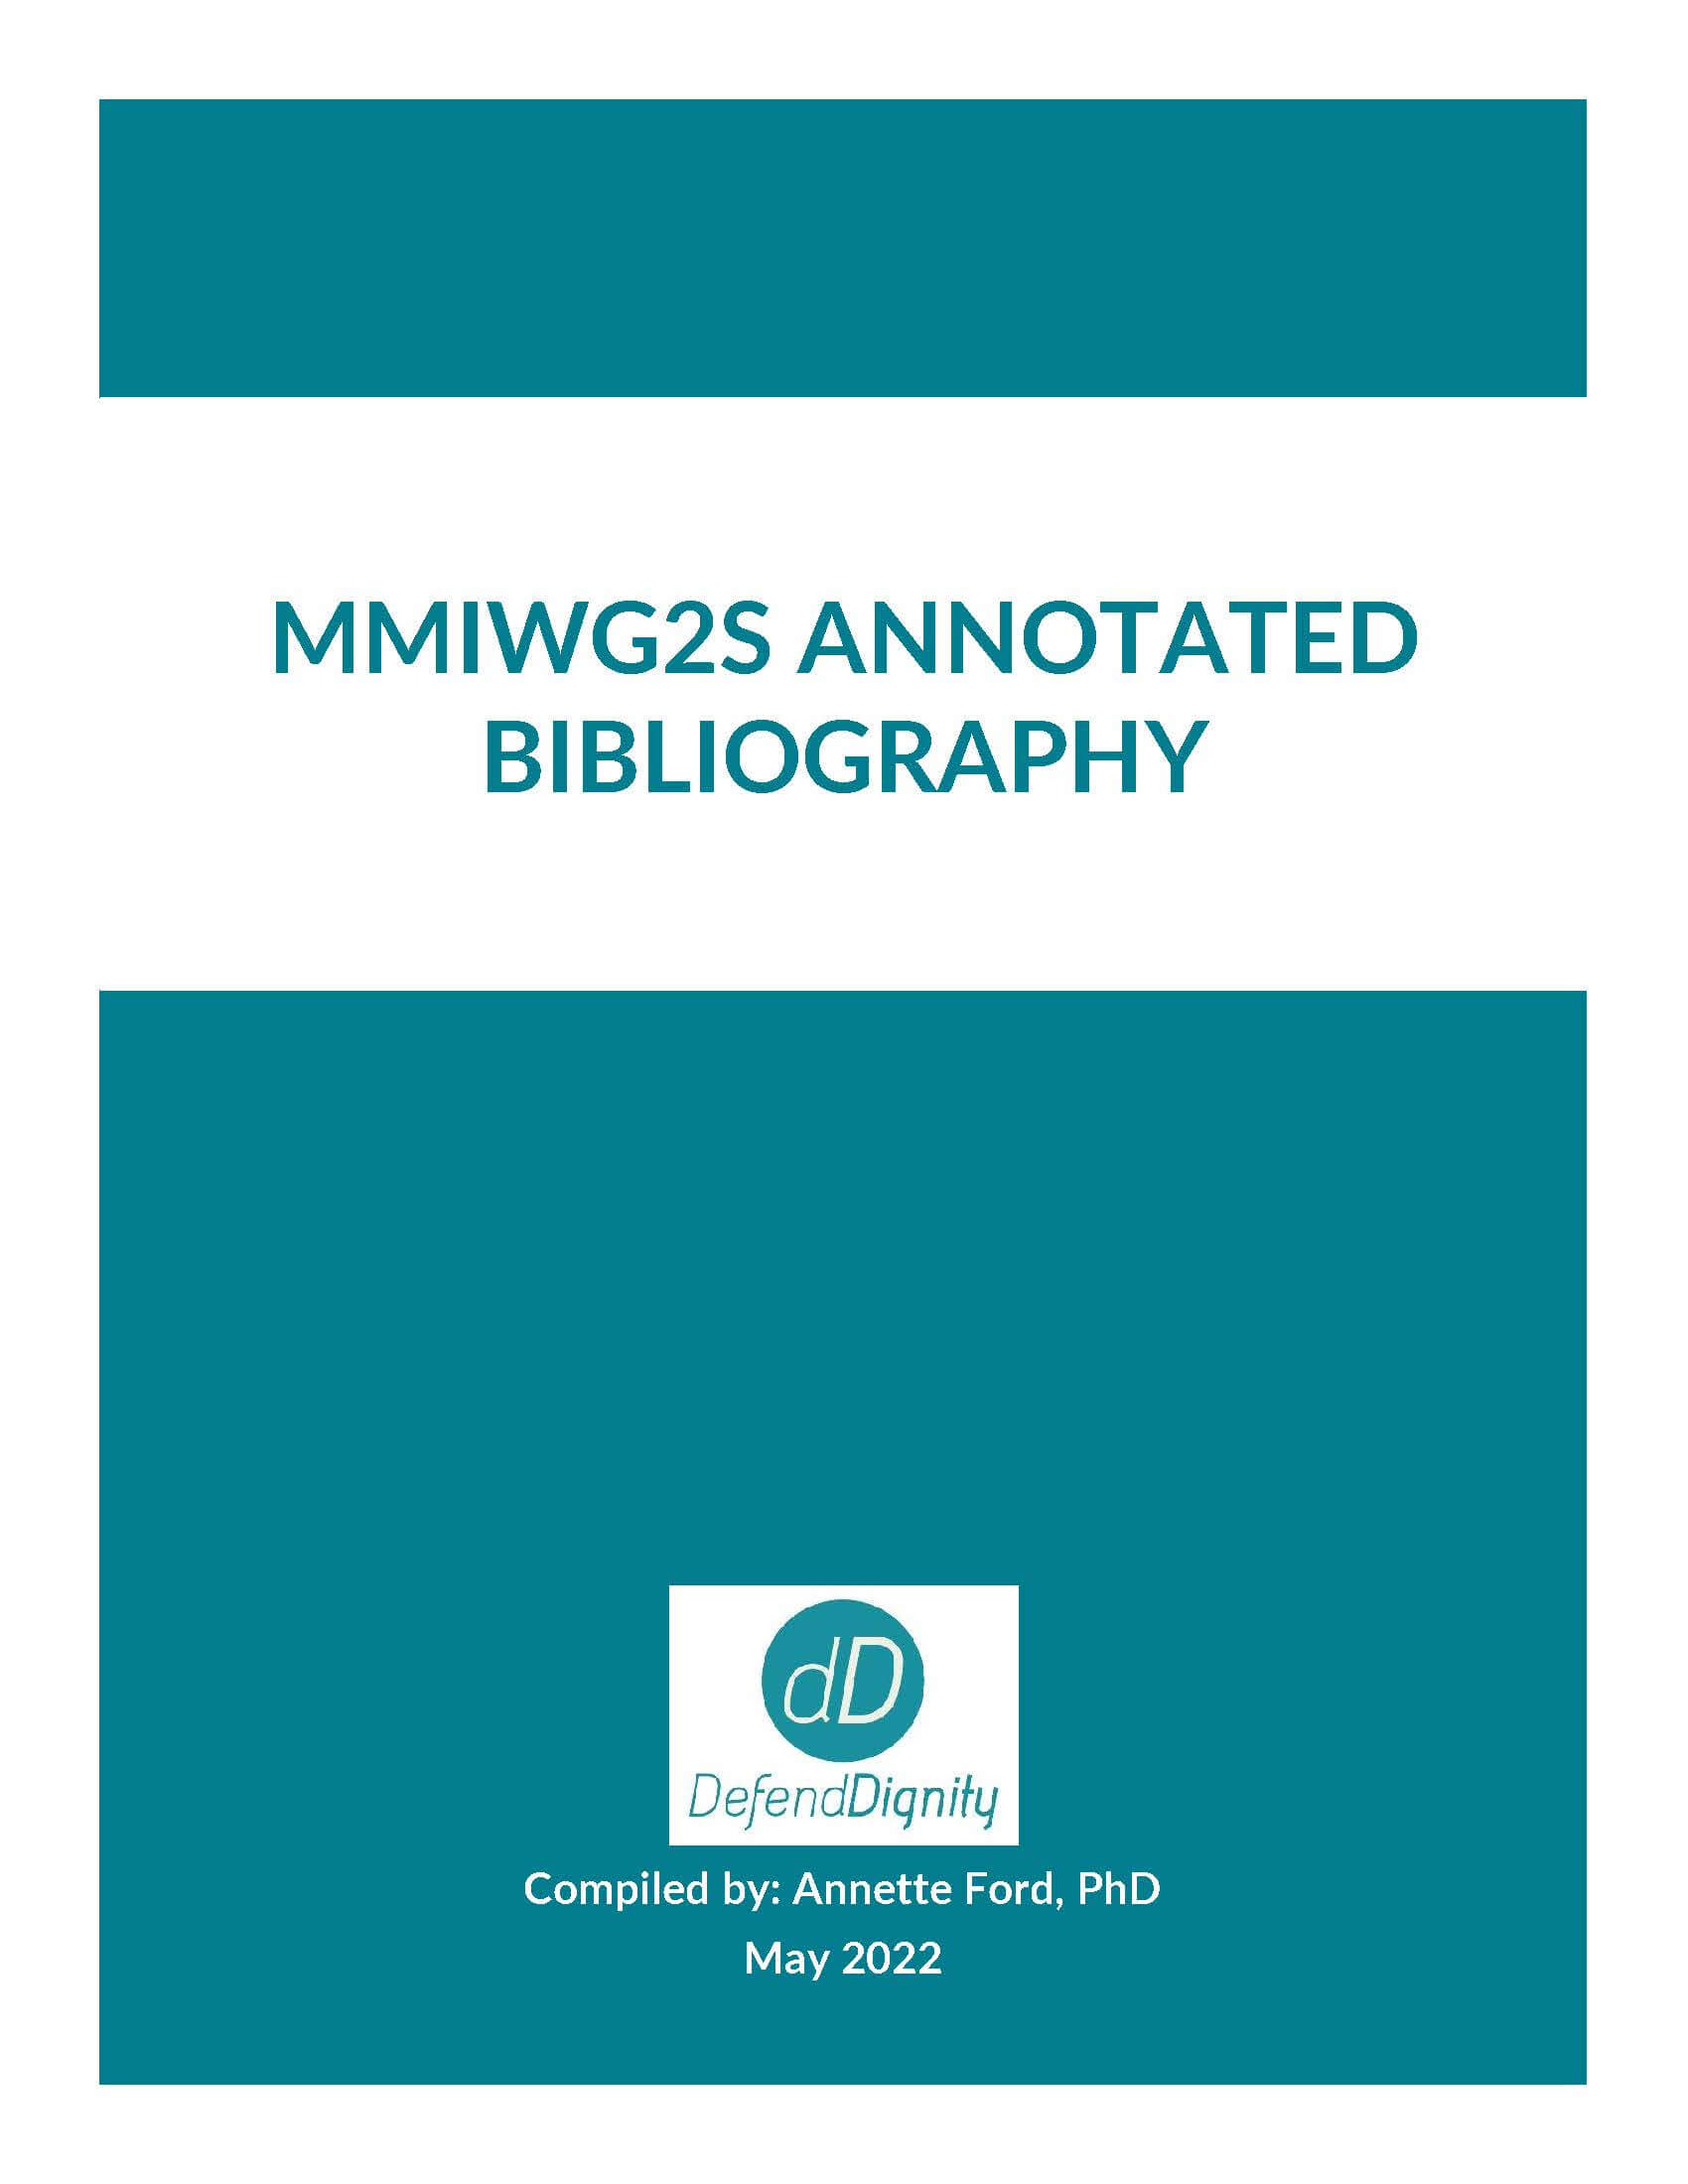 MMIW2GS Annotated Bibliography Cover